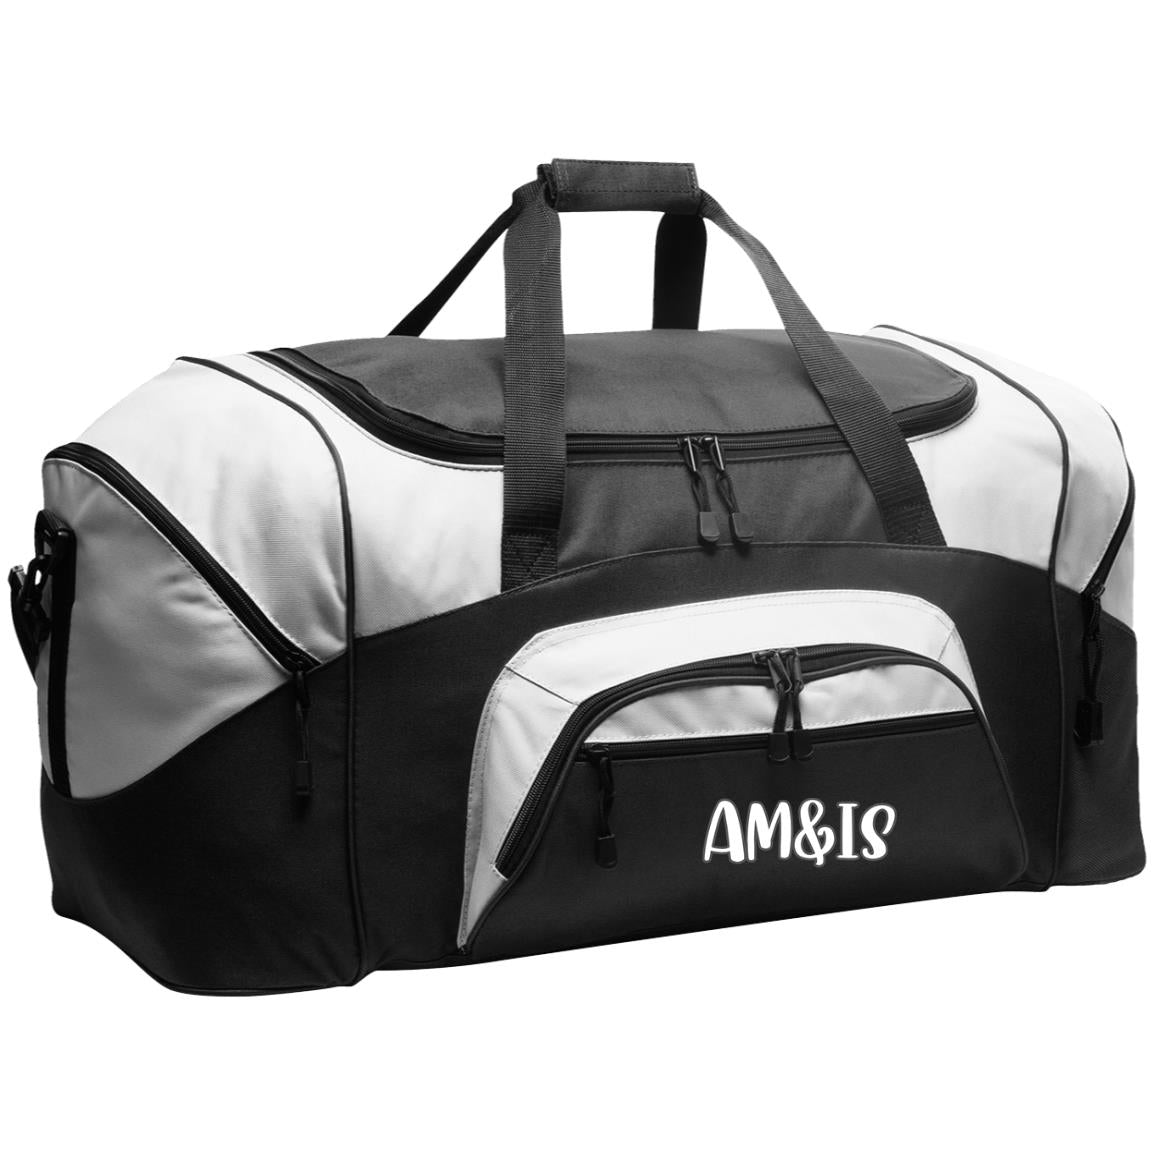 BLACK/GRAY ONE SIZE - AM&IS Activewear Colorblock Sport Duffel - duffel bag at TFC&H Co.